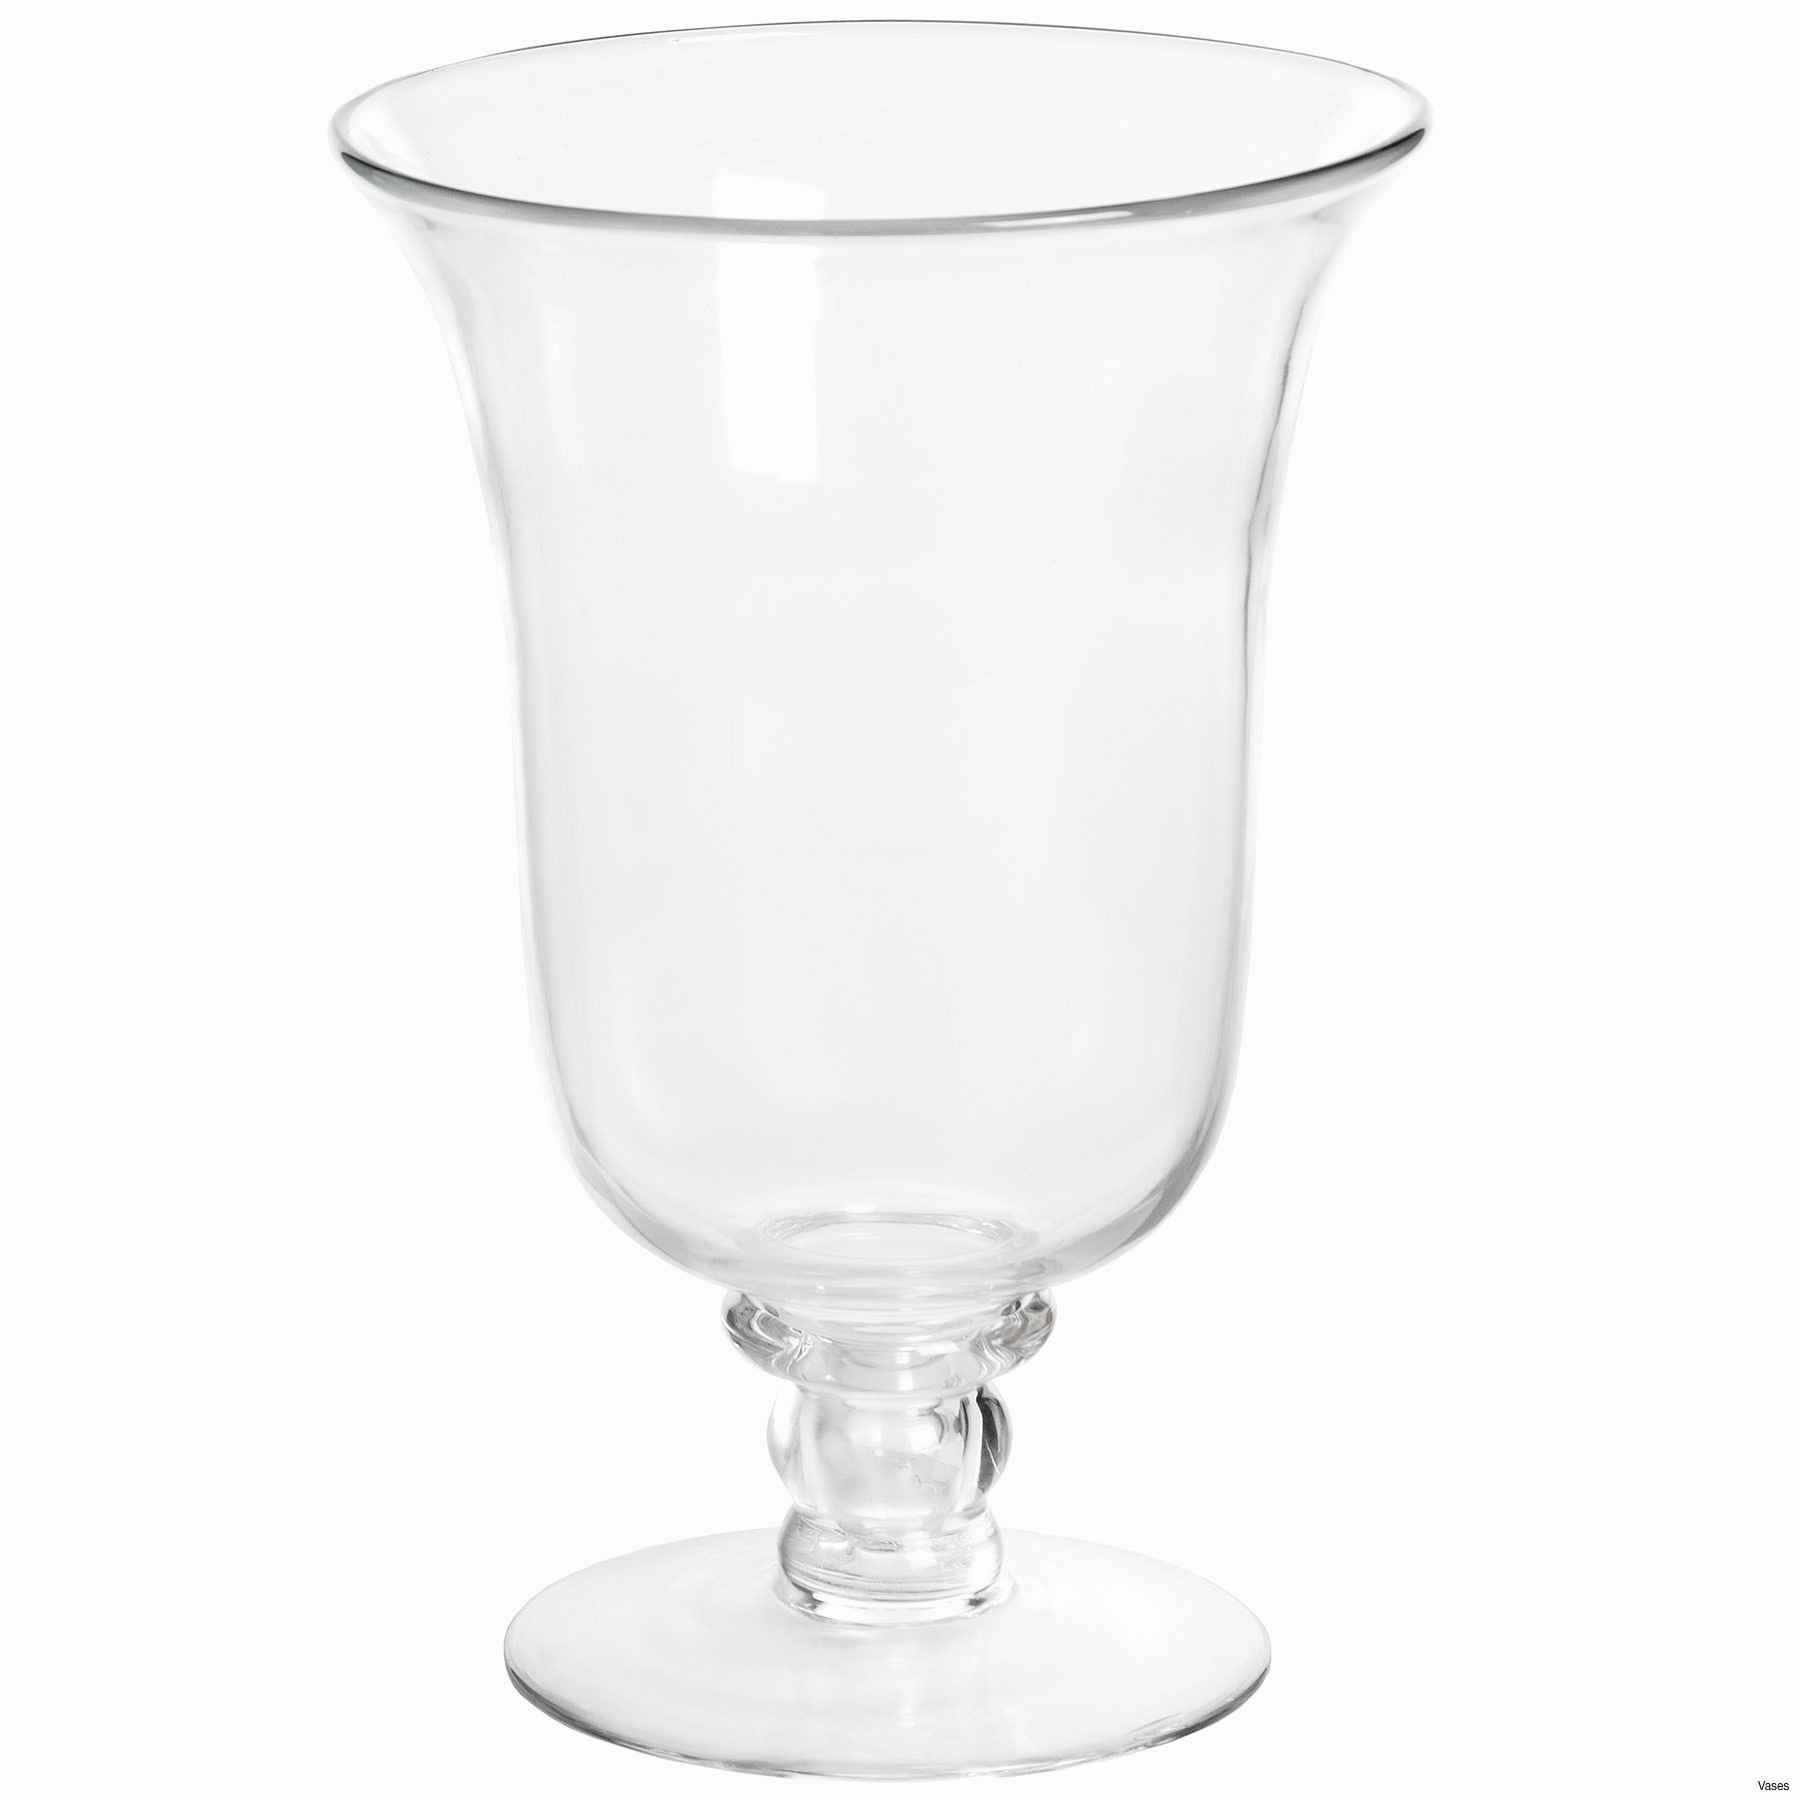 Black and White Vases Cheap Of Candle Stands wholesale Lovely Faux Crystal Candle Holders Alive Intended for Candle Stands wholesale Lovely Faux Crystal Candle Holders Alive Vases Gold Tall Jpgi 0d Cheap In